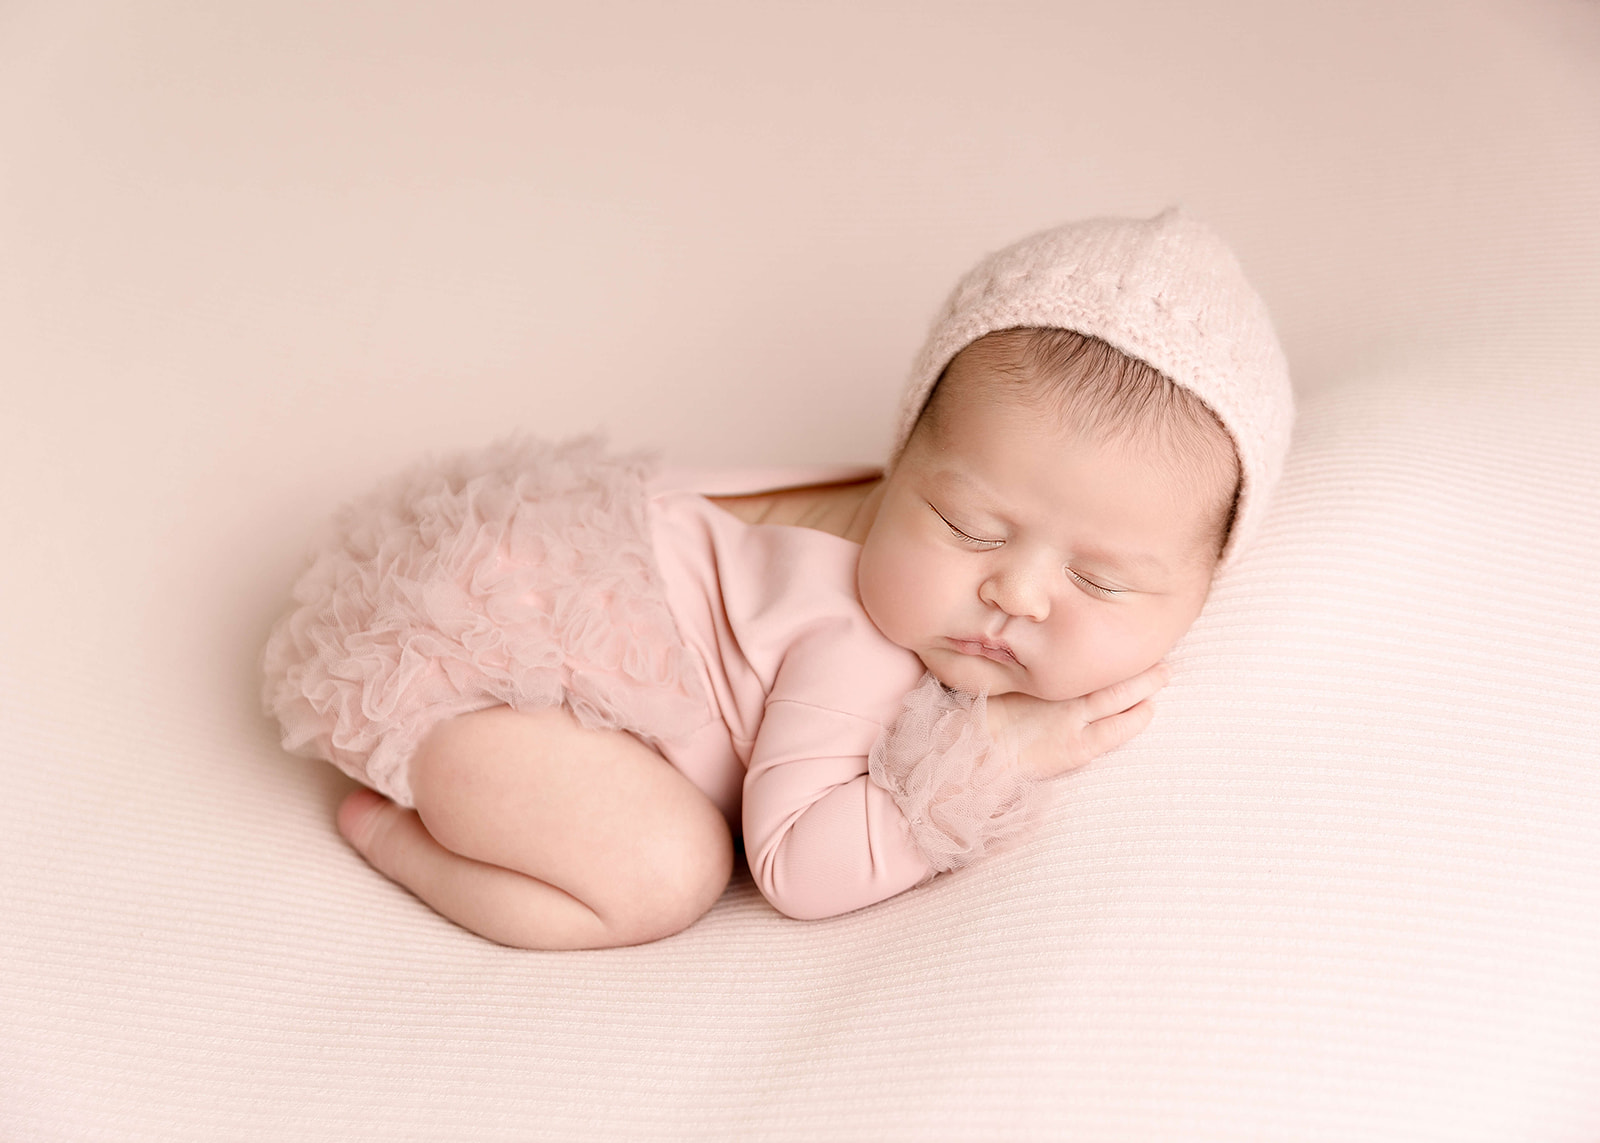 A newborn baby sleeps in froggy pose on a soft pink bed wearing a knit pink hat and pink onesie Los Angeles Midwives